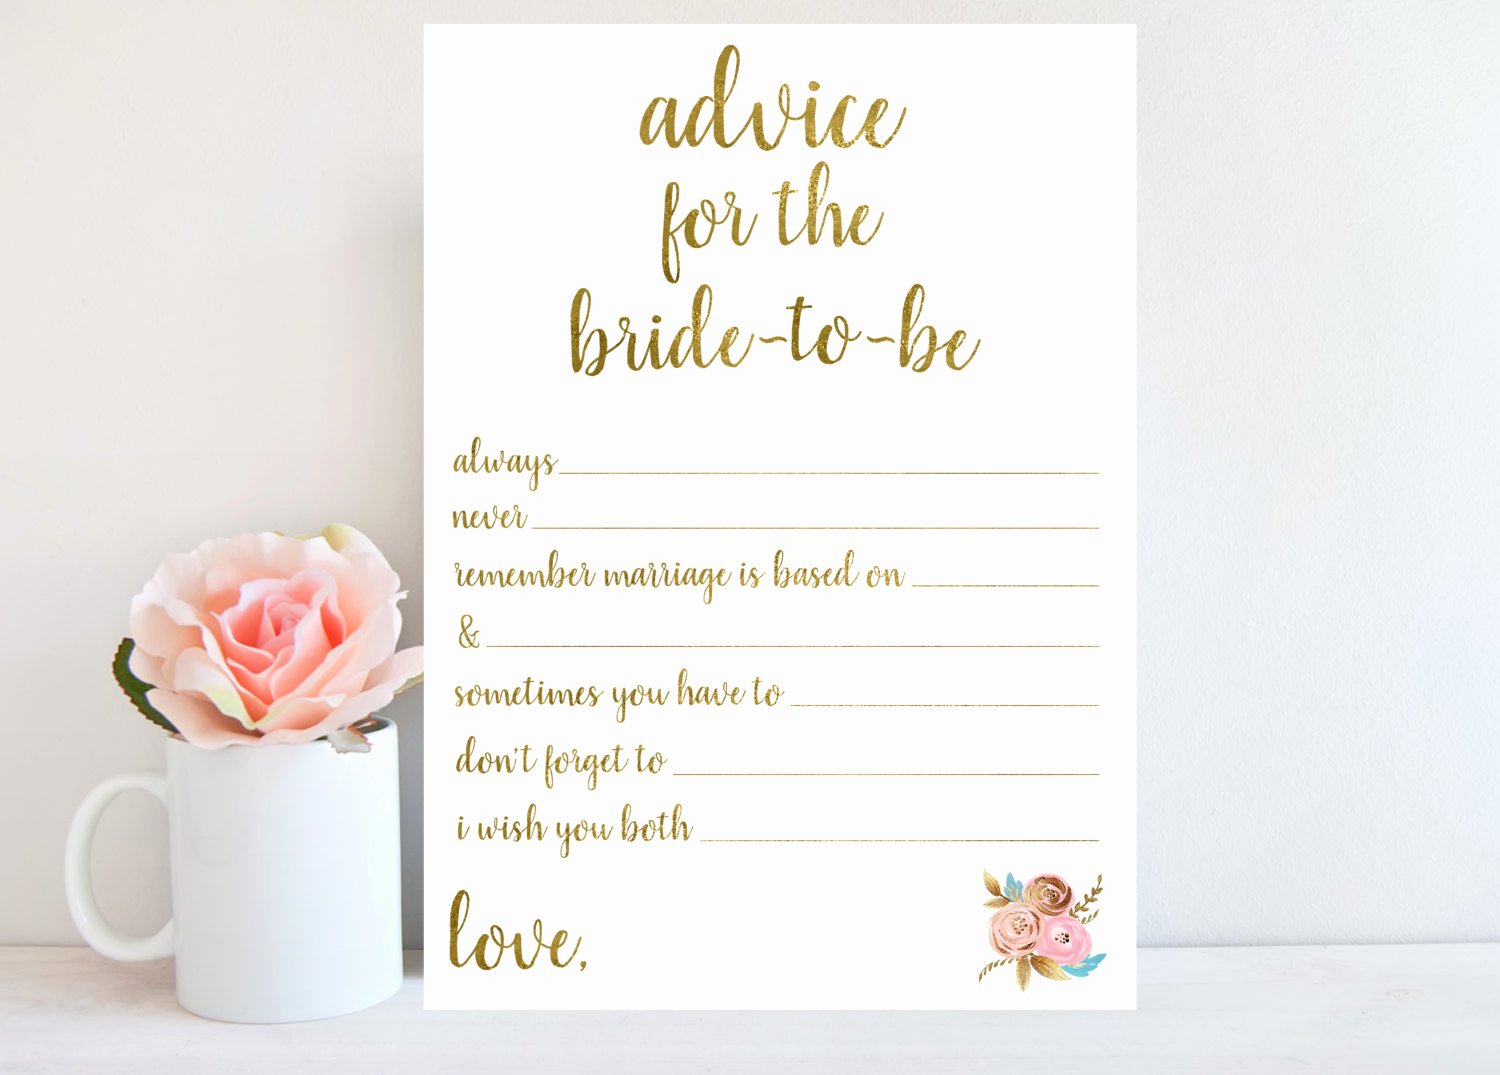 Bridal Shower Advice Cards Luxury Advice for Bride to Be Bridal Shower Advice Cards Printable